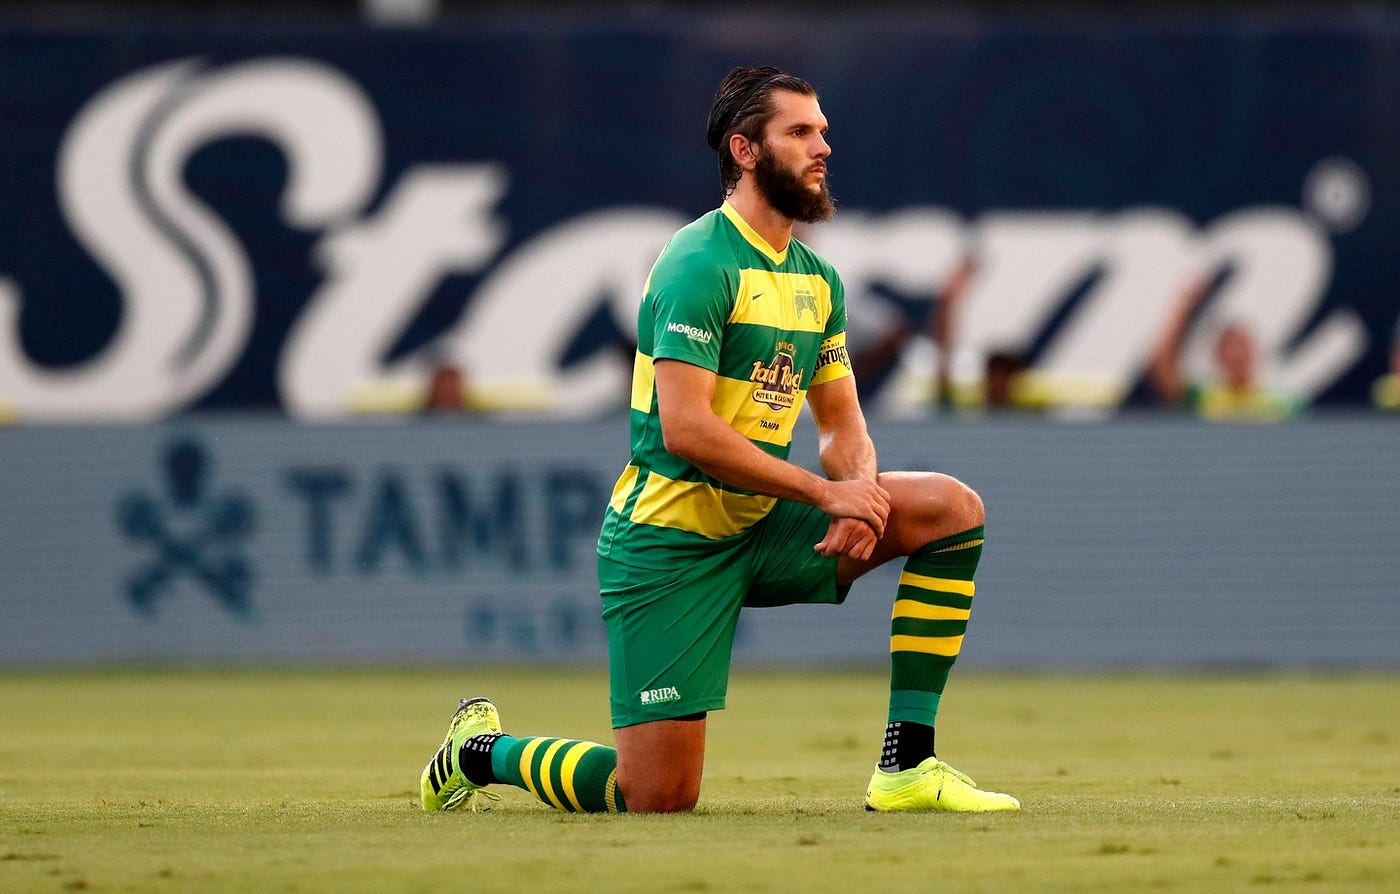 The 2021 Tampa Bay Rowdies Season and Roster Preview